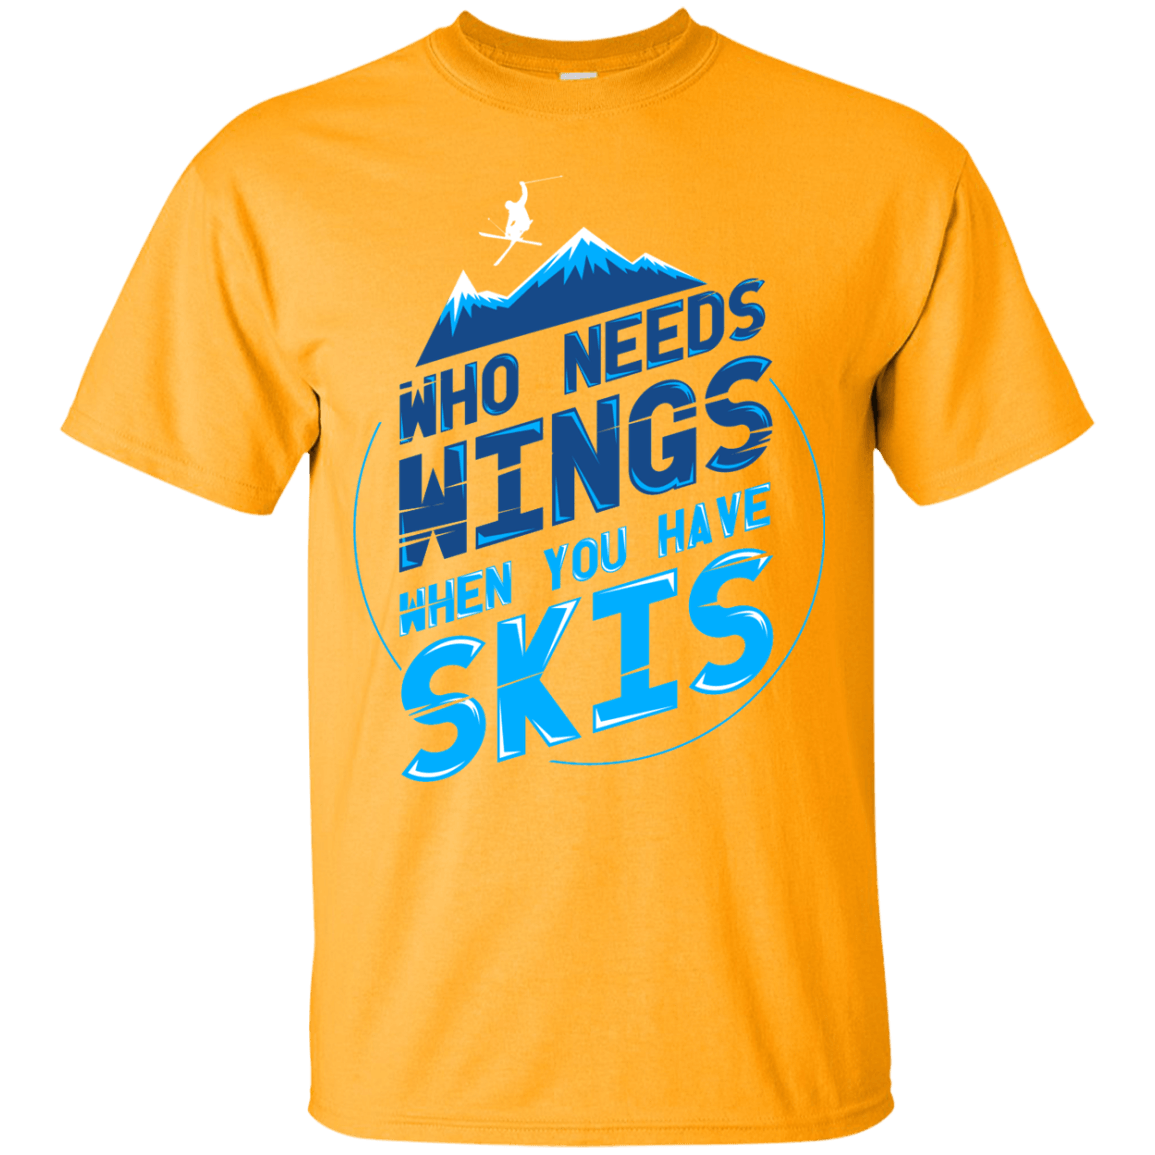 Who Needs Wings When You Have Skis Tees - Powderaddicts